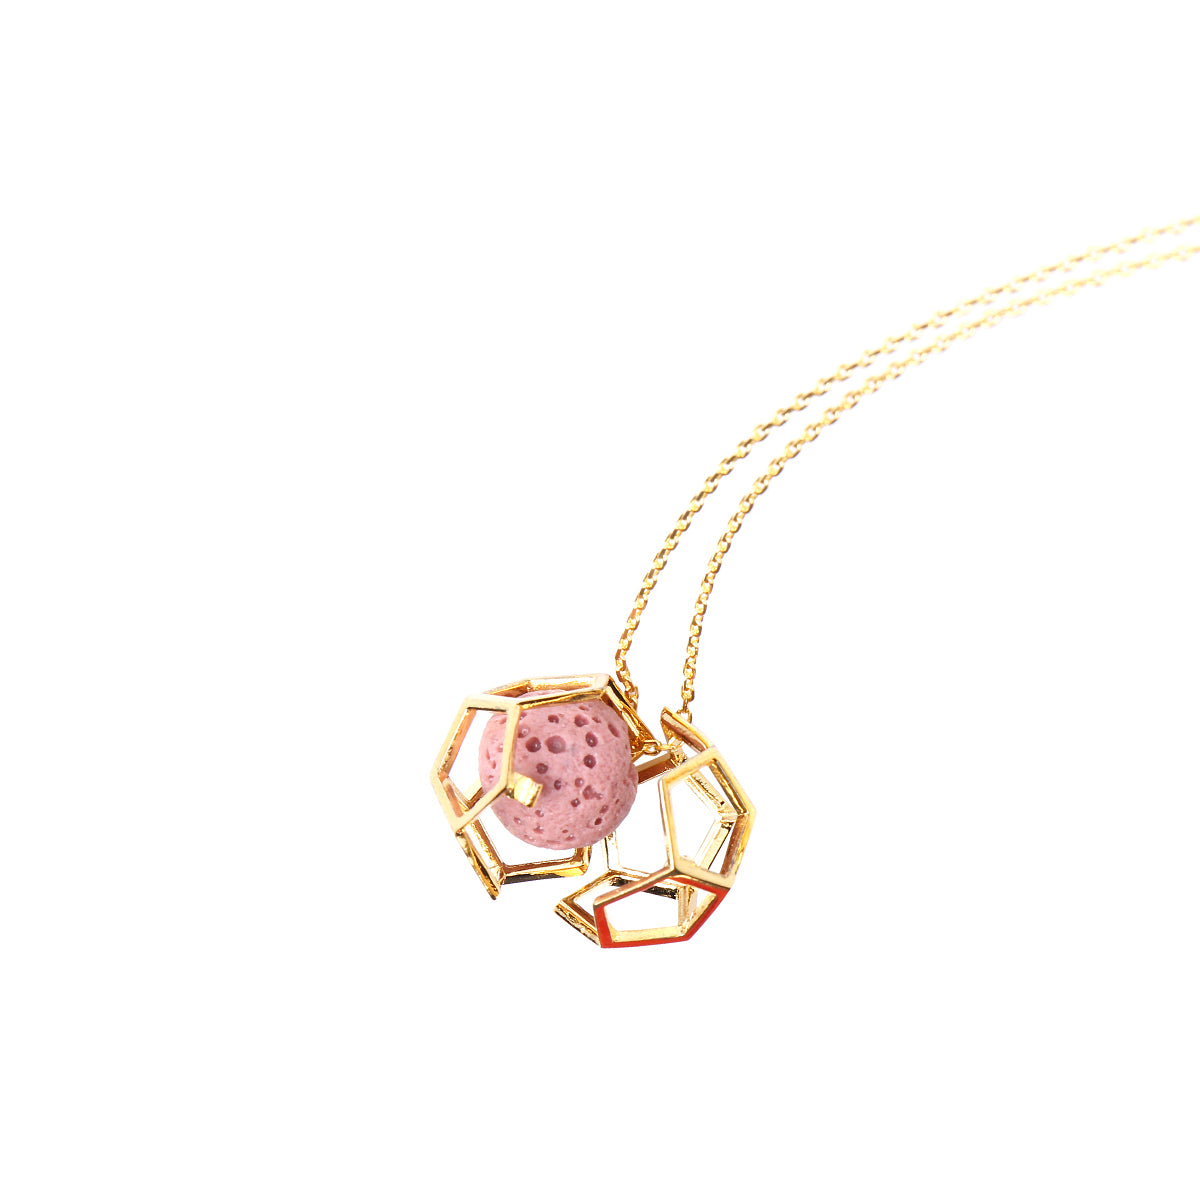 "AMELIA" SPACE ELEMENT(DODECAHEDRON) DIFFUSER NECKLACE